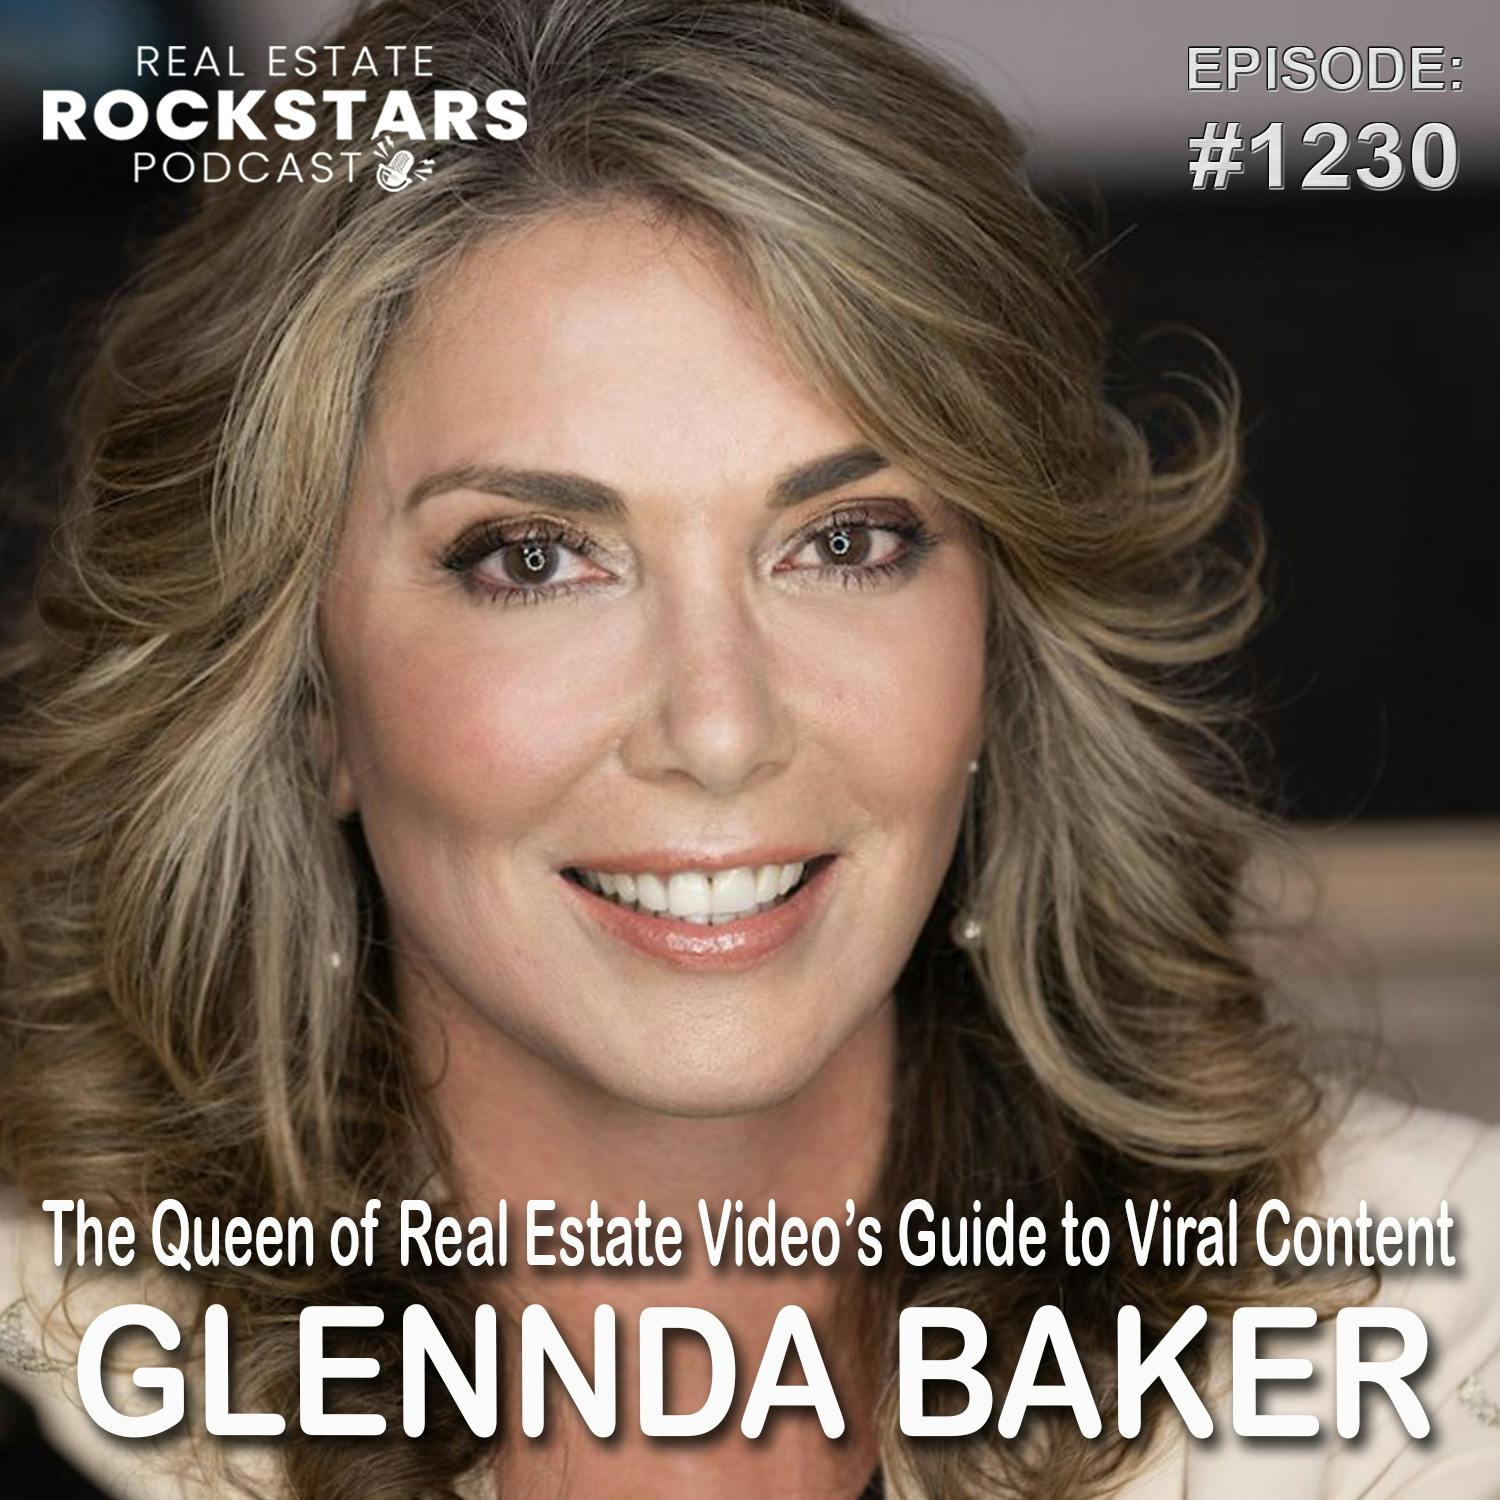 1230: Glennda Baker: The Queen of Real Estate Video’s Guide to Viral Content